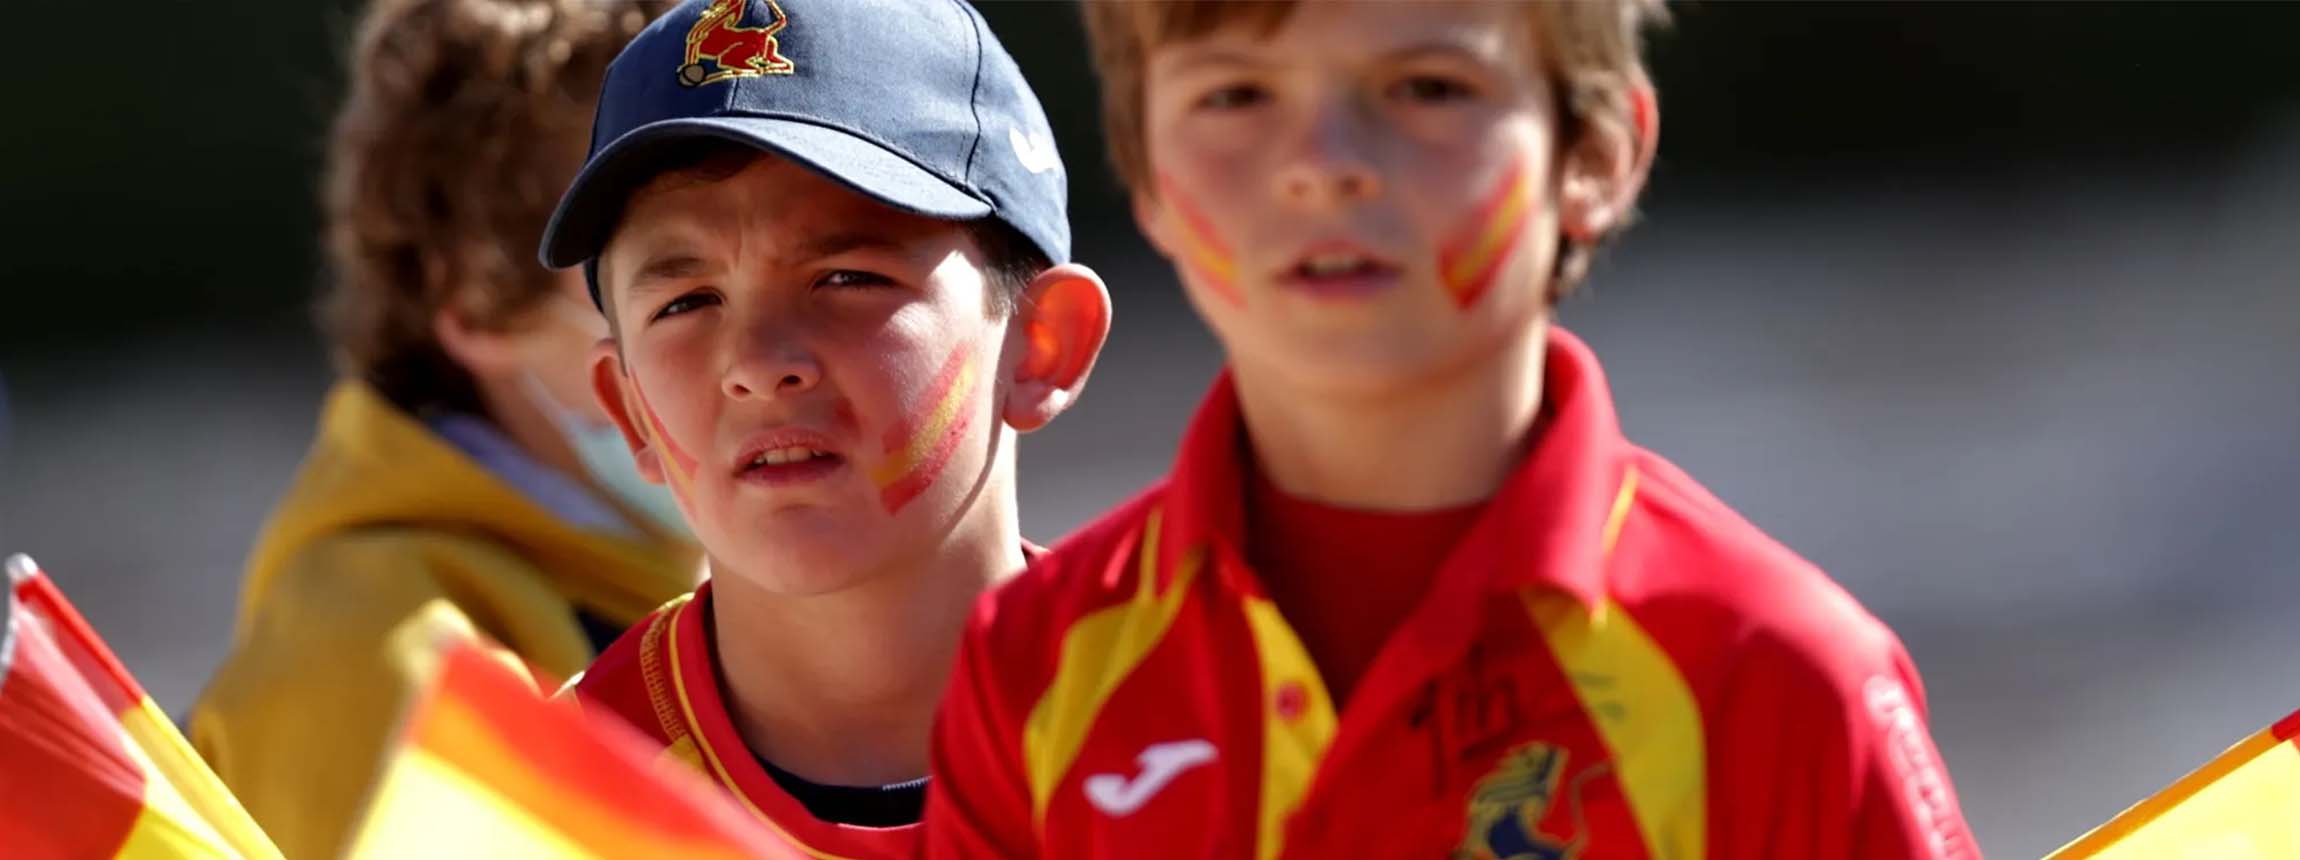 Rugby Children Supporting Spain